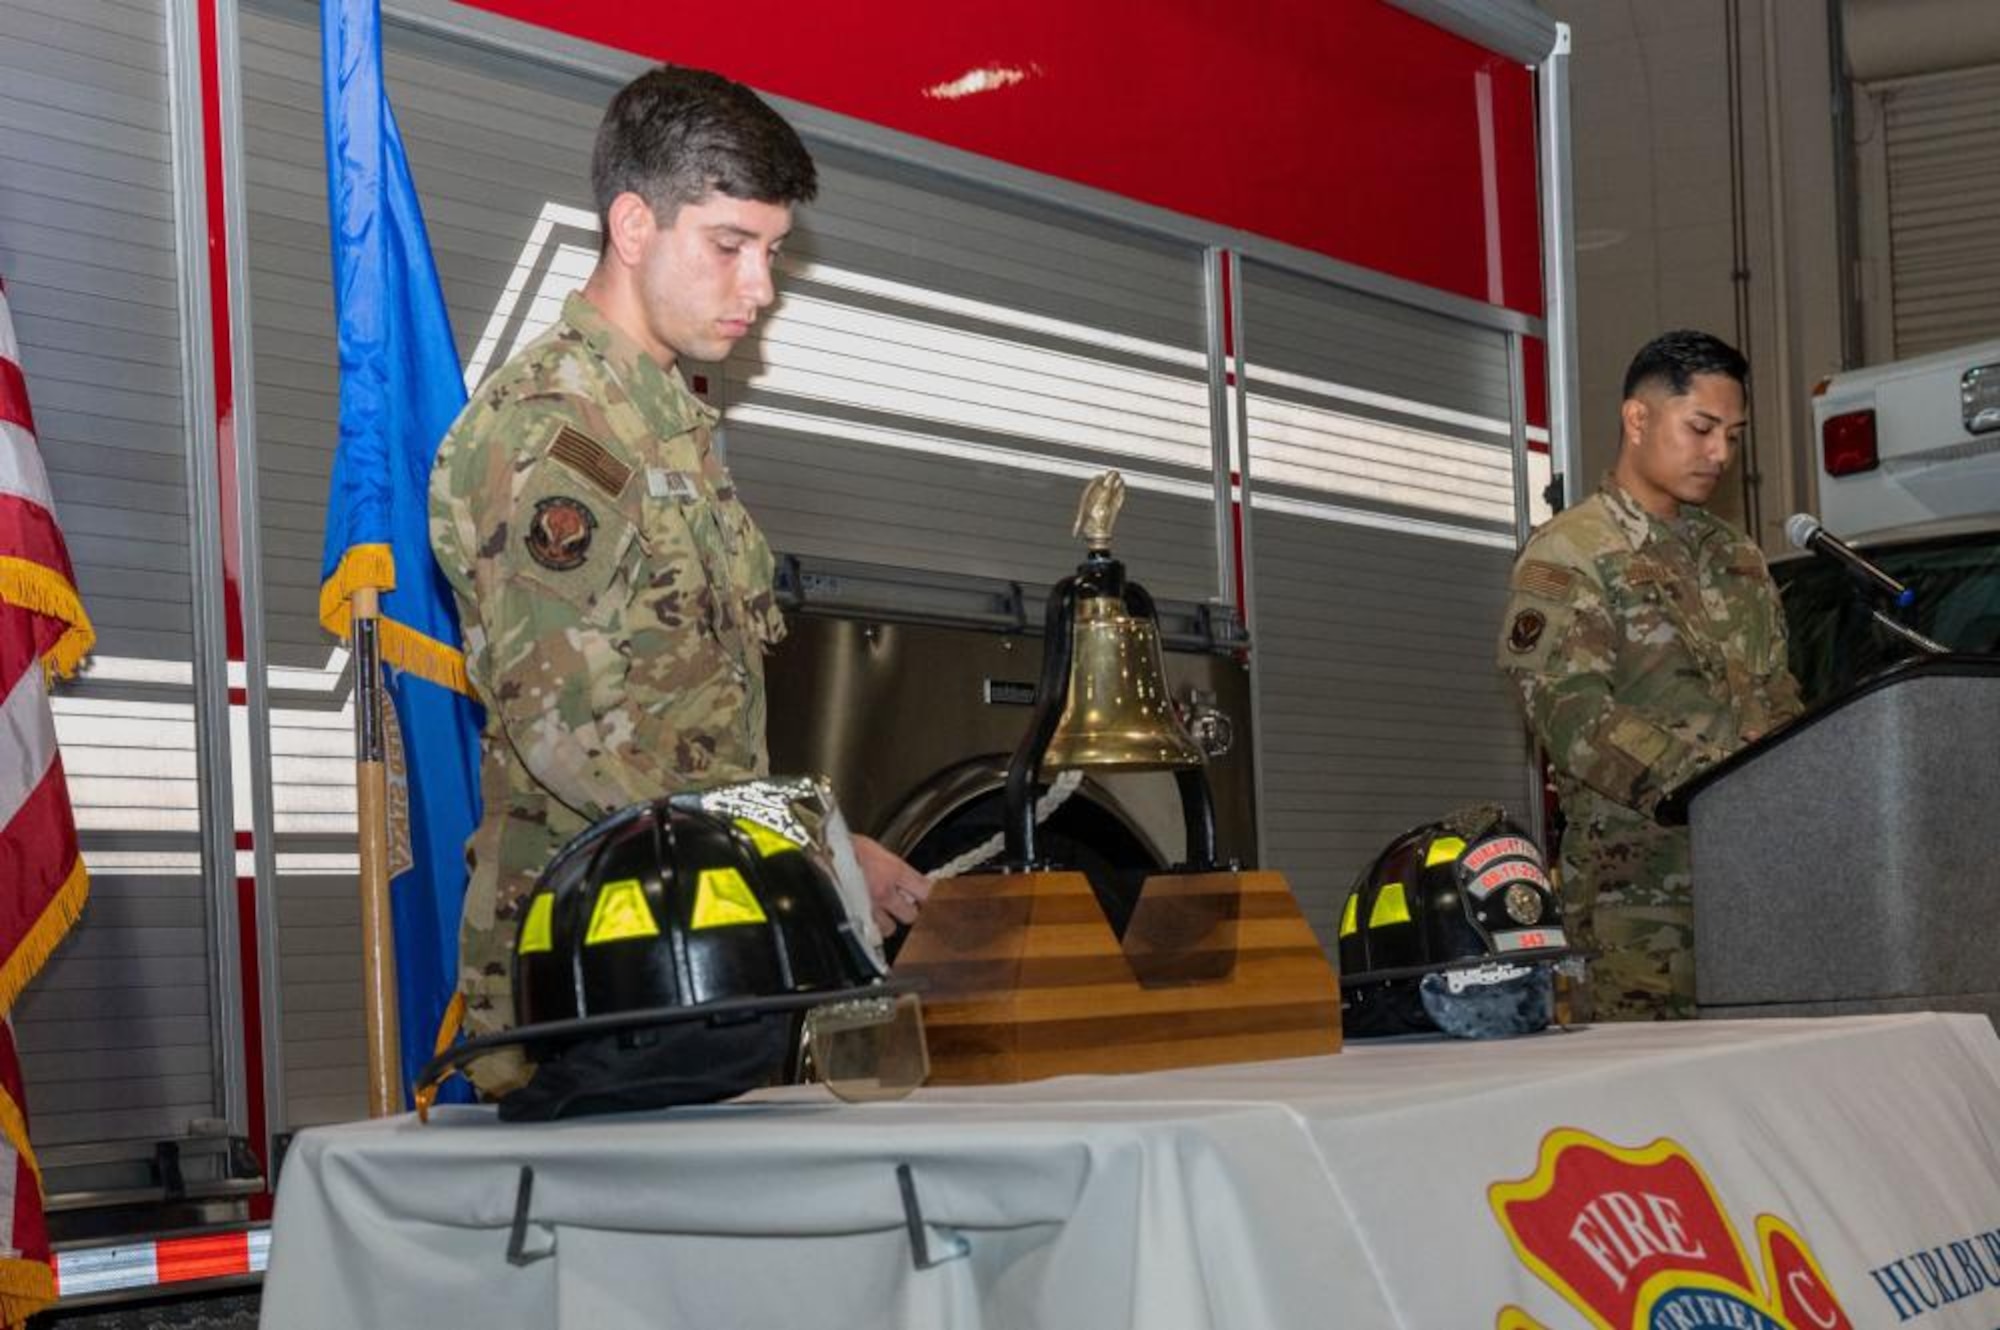 U.S. Air Force Airman 1st Class Jeremy Soto, a firefighter with the 1st Special Operations Civil Engineer Squadron, rings a ceremonial bell during a 9/11 remembrance at Hurlburt Field, Florida, Sept. 9, 2022.